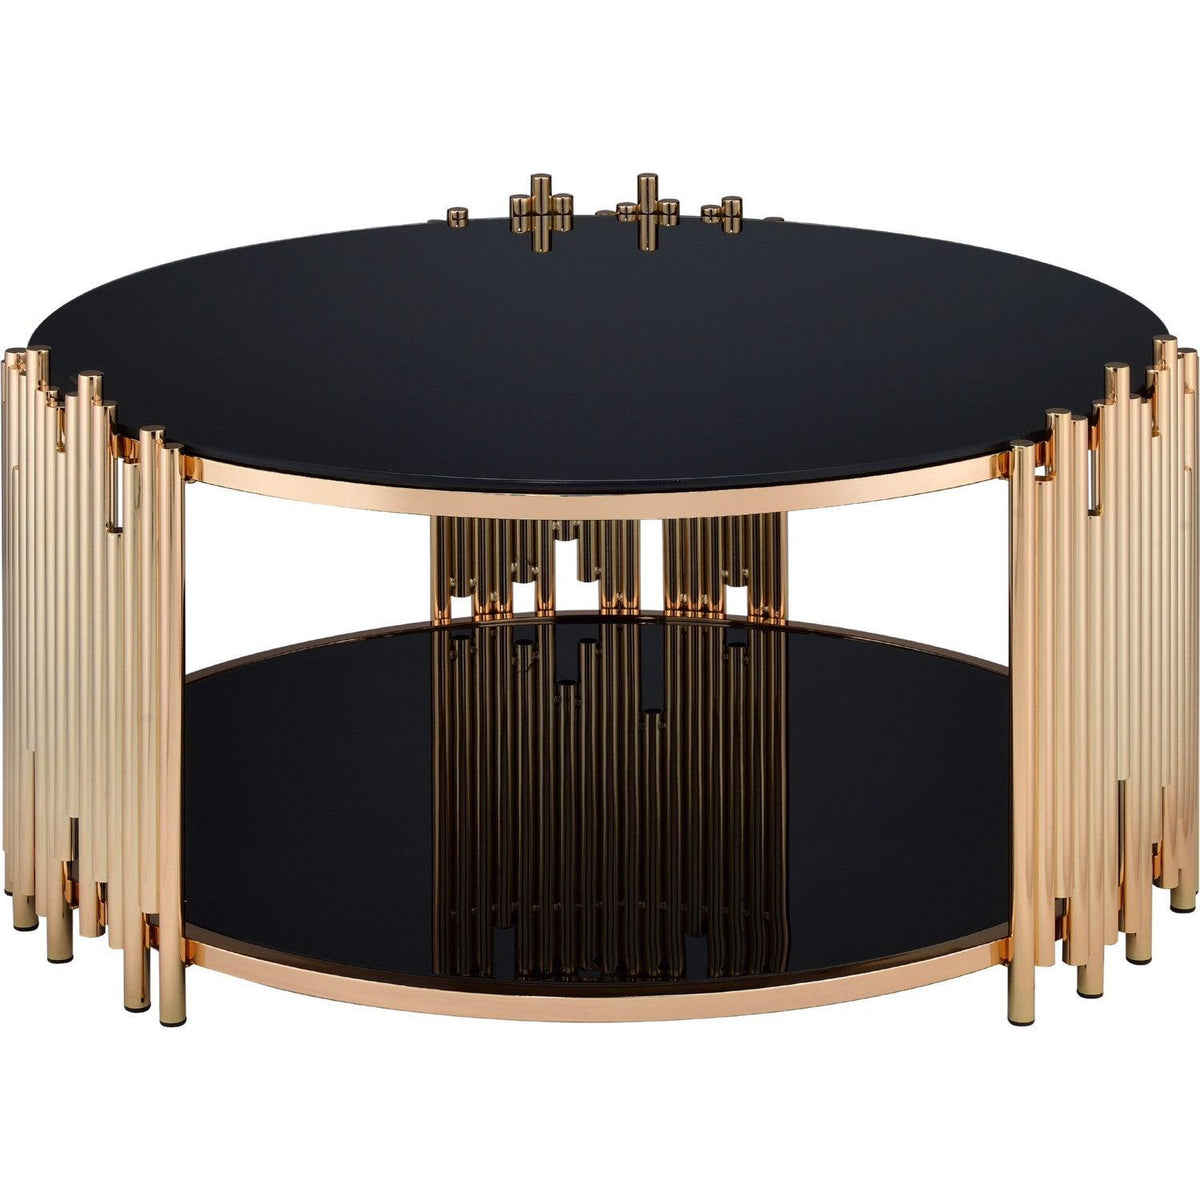 Acme Furniture Tanquin Coffee Table in Gold/Black 84490  Las Vegas Furniture Stores